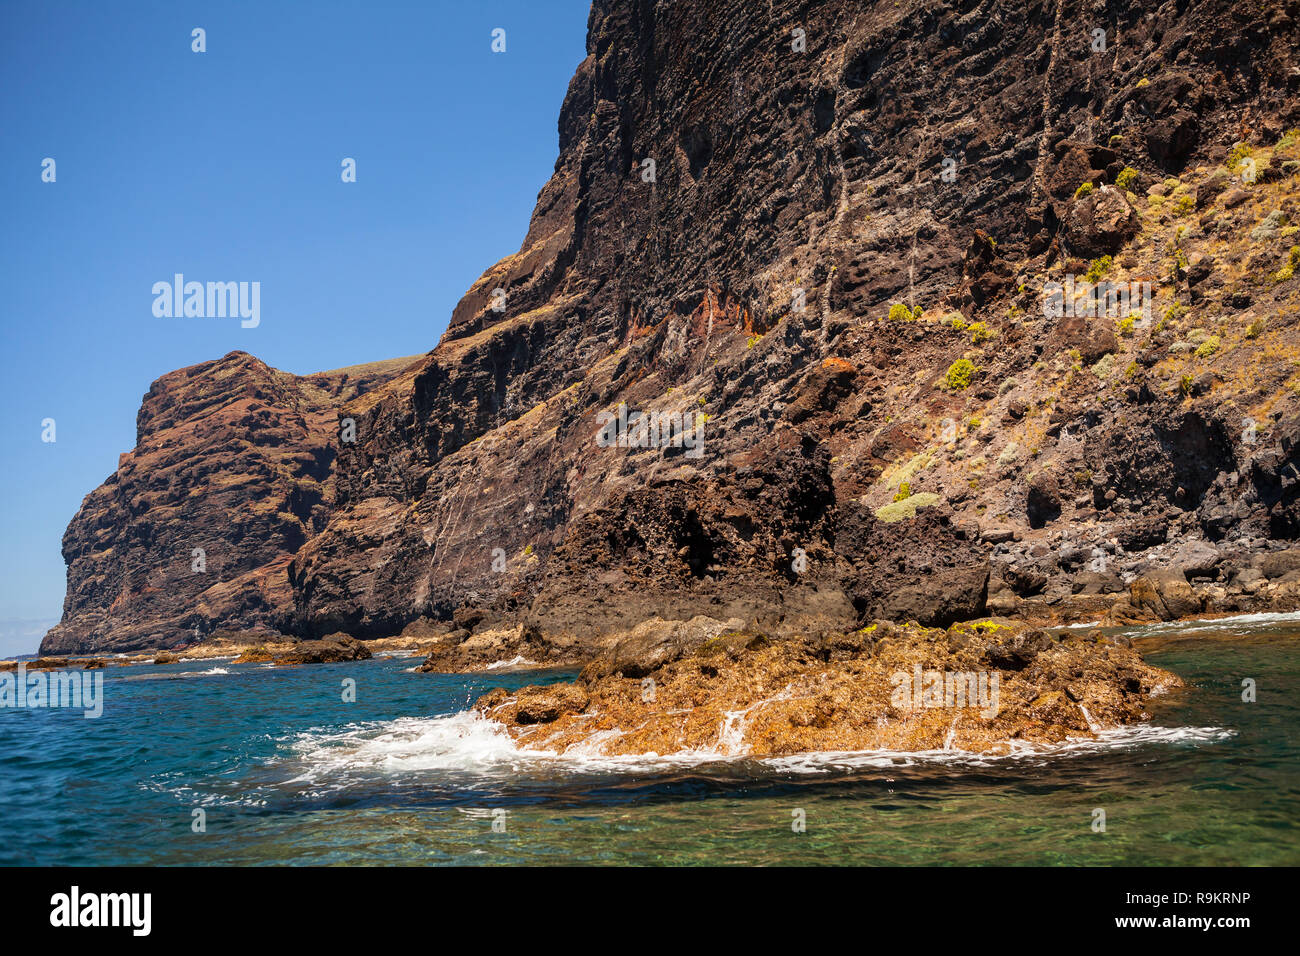 Cliffs of Los Gigantes in Tenerife, Canary Islands, Spain. Stock Photo